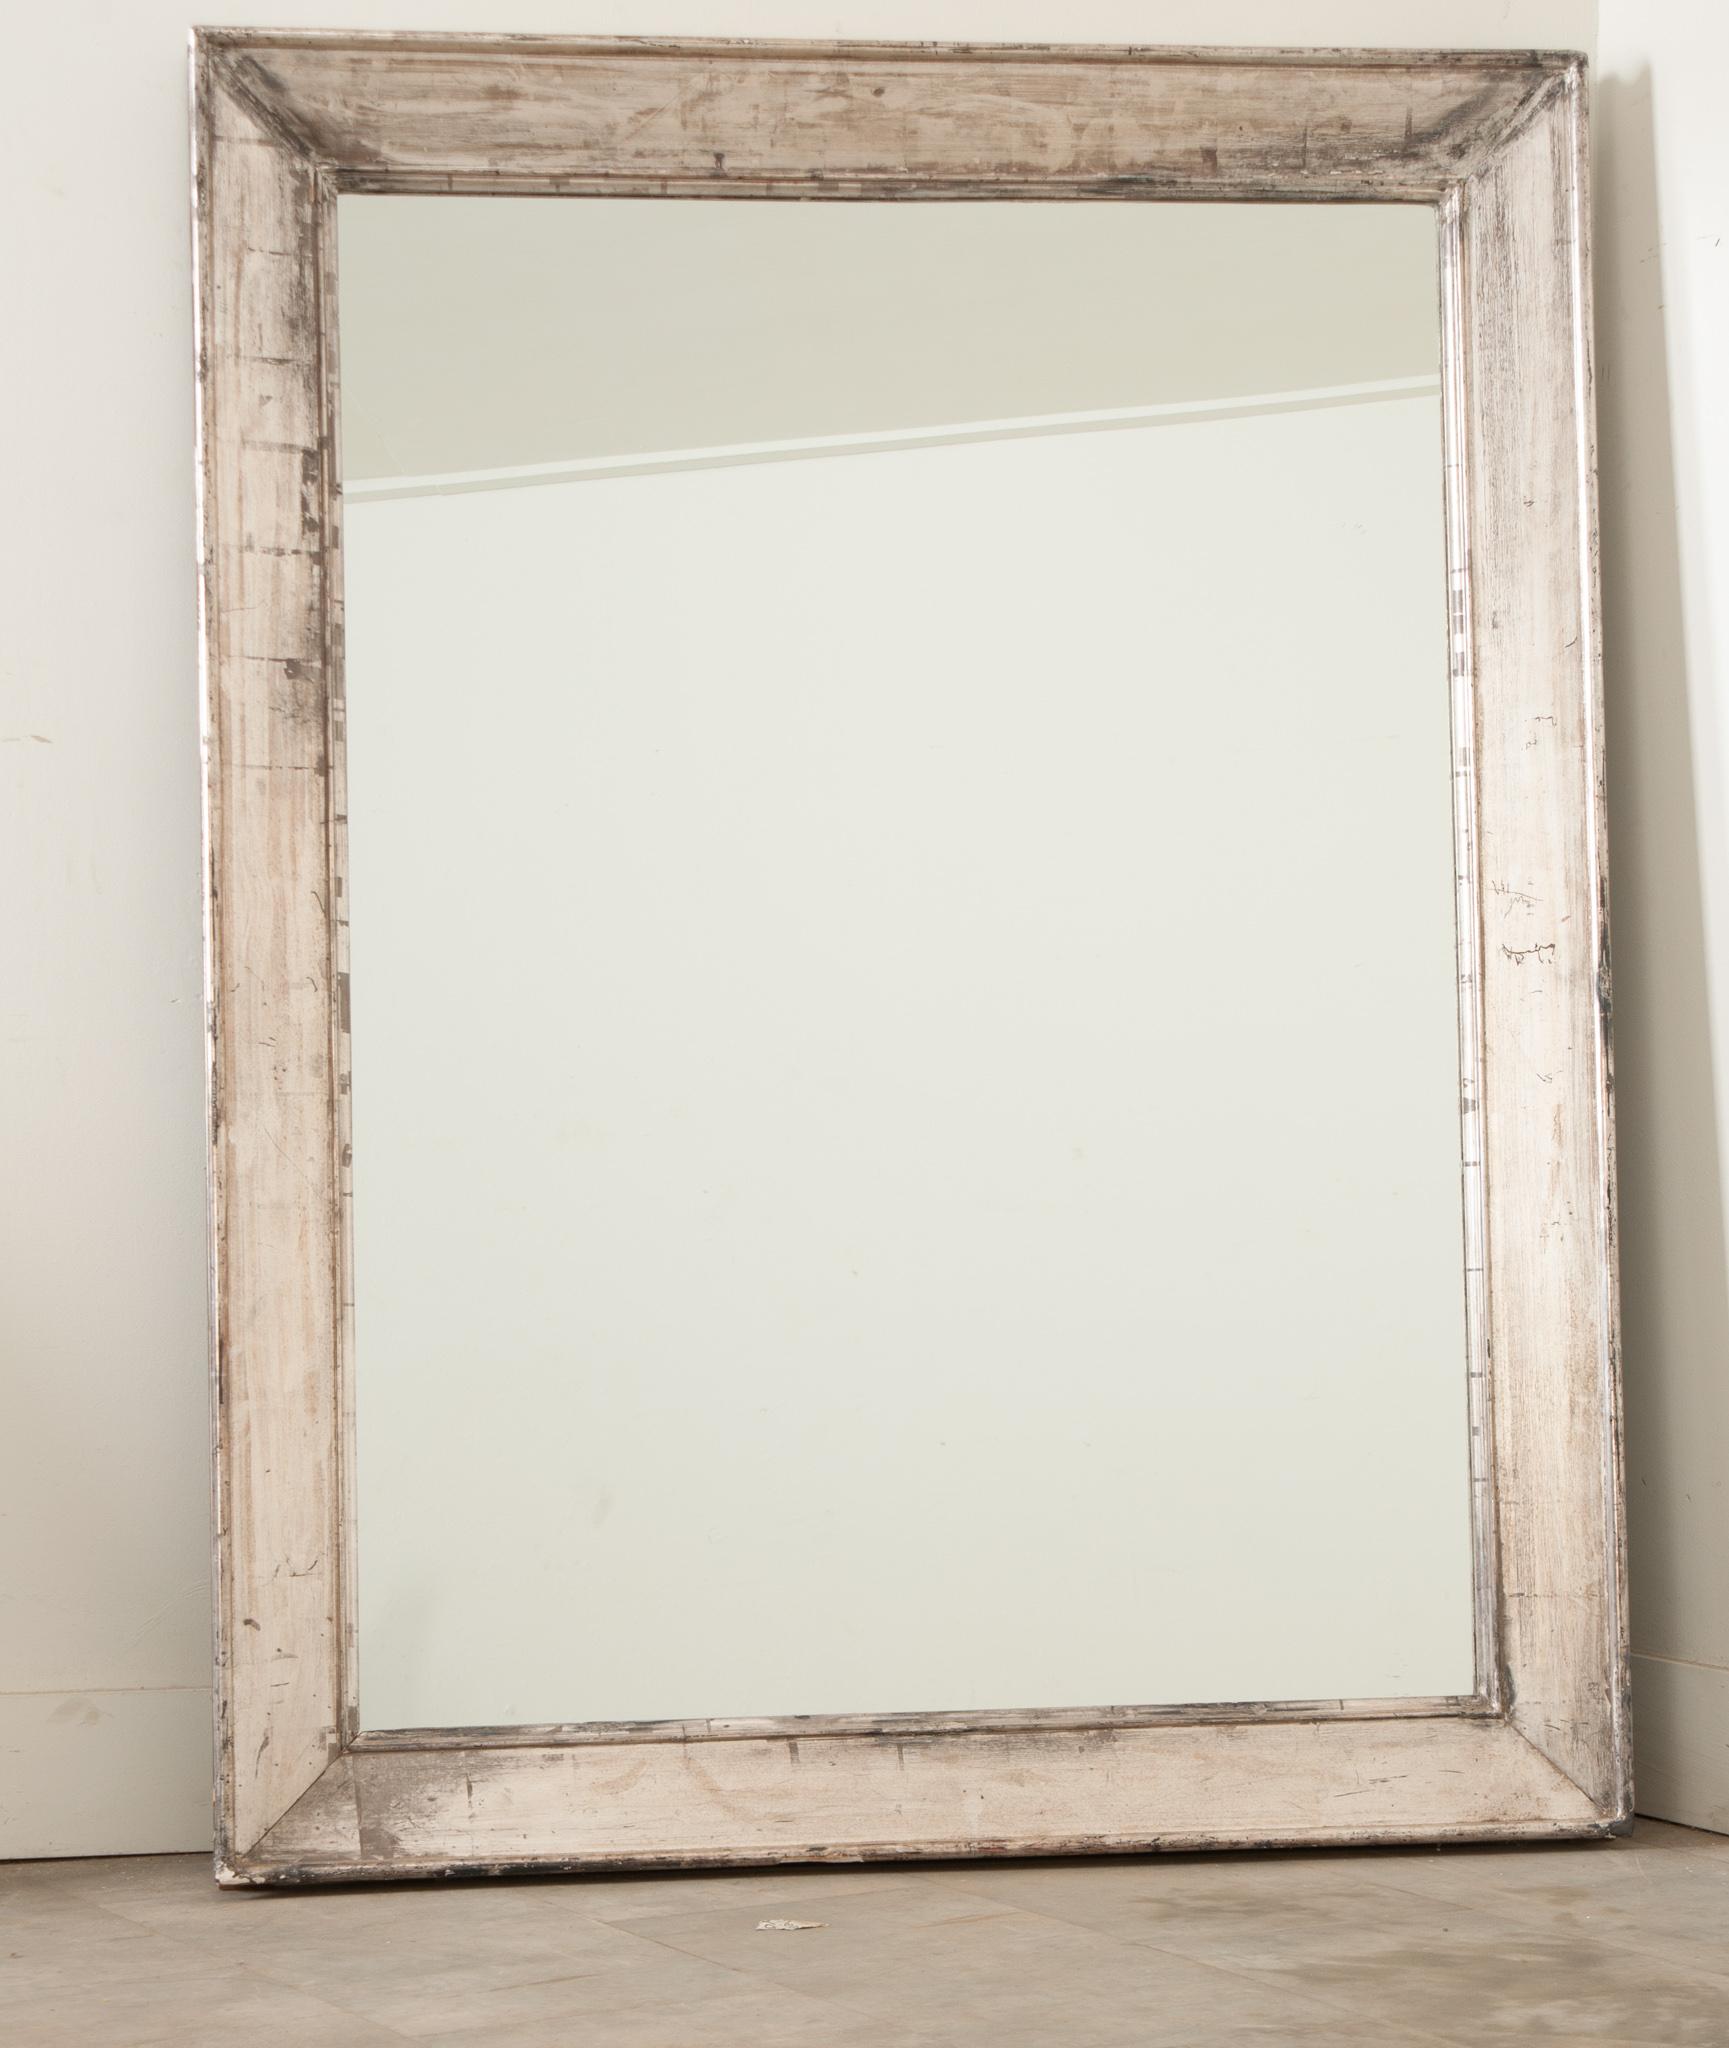 A recently made, substantial, beveled wood mirror frame has an intentionally worn silver gilt finish. New mirror plate. This mirror is sure to make a statement in any interior. Be sure to view the detailed images. 